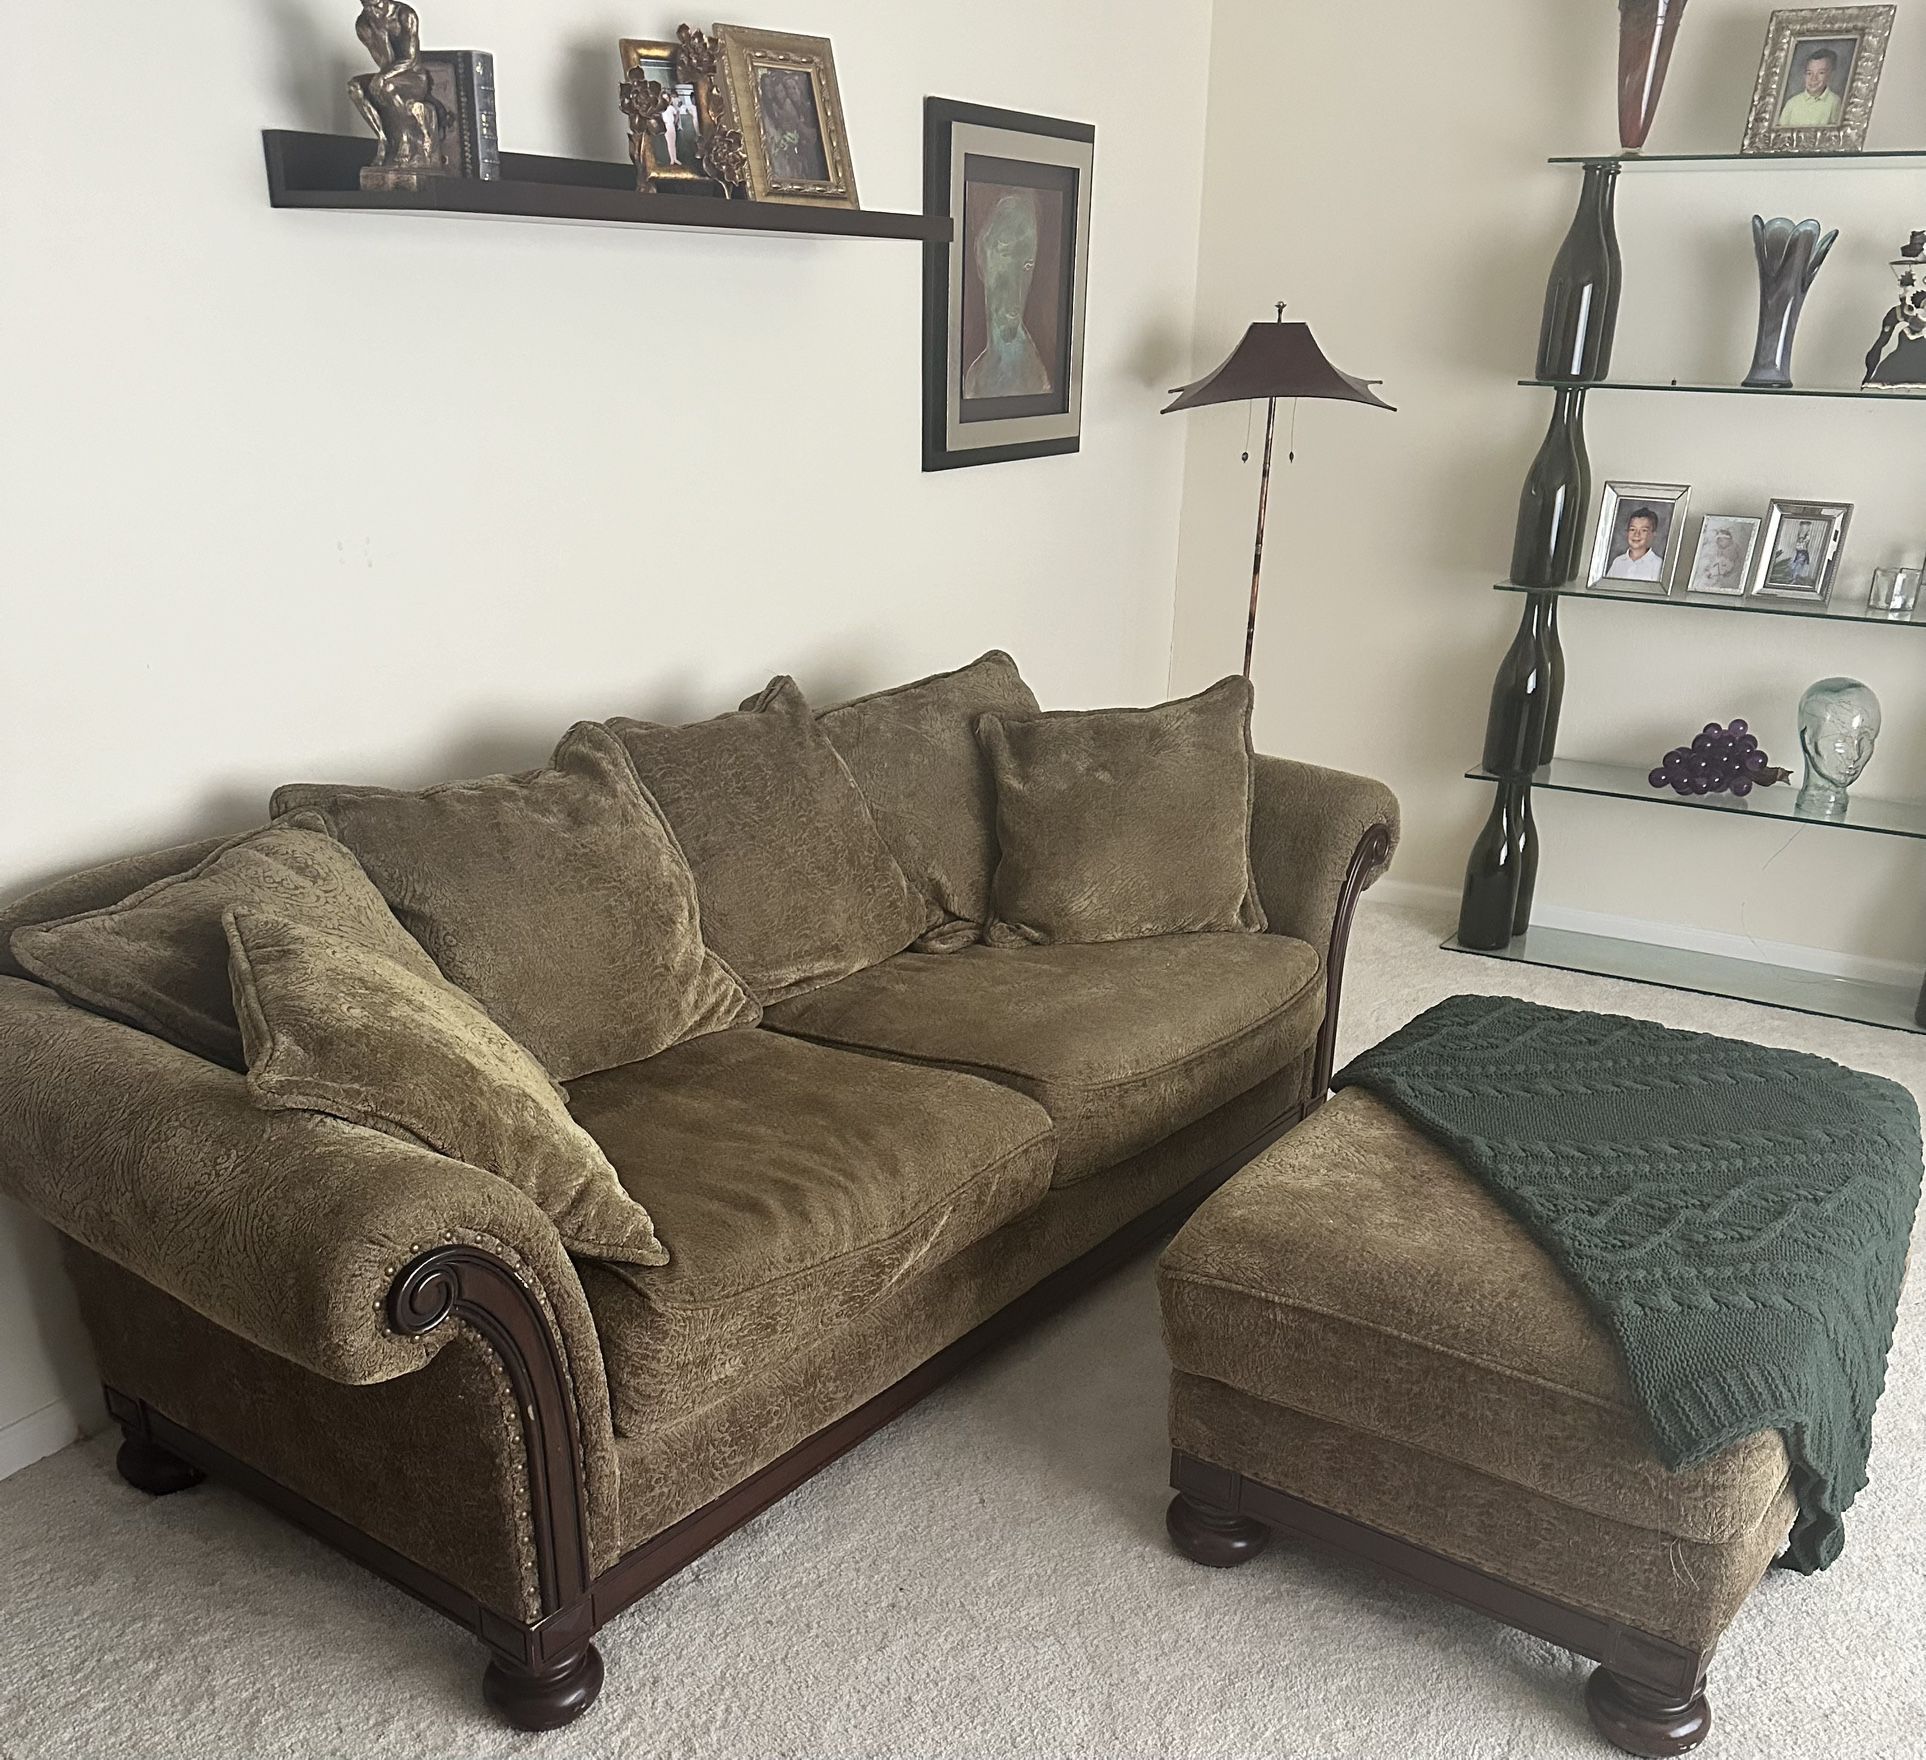 Macys Fabric Traditional Couch Set  Couch ,Ottoman and Oversized Chair Good quality down stuffed  Sooo comfortable!! Pics show stain on ottoman.  Couc